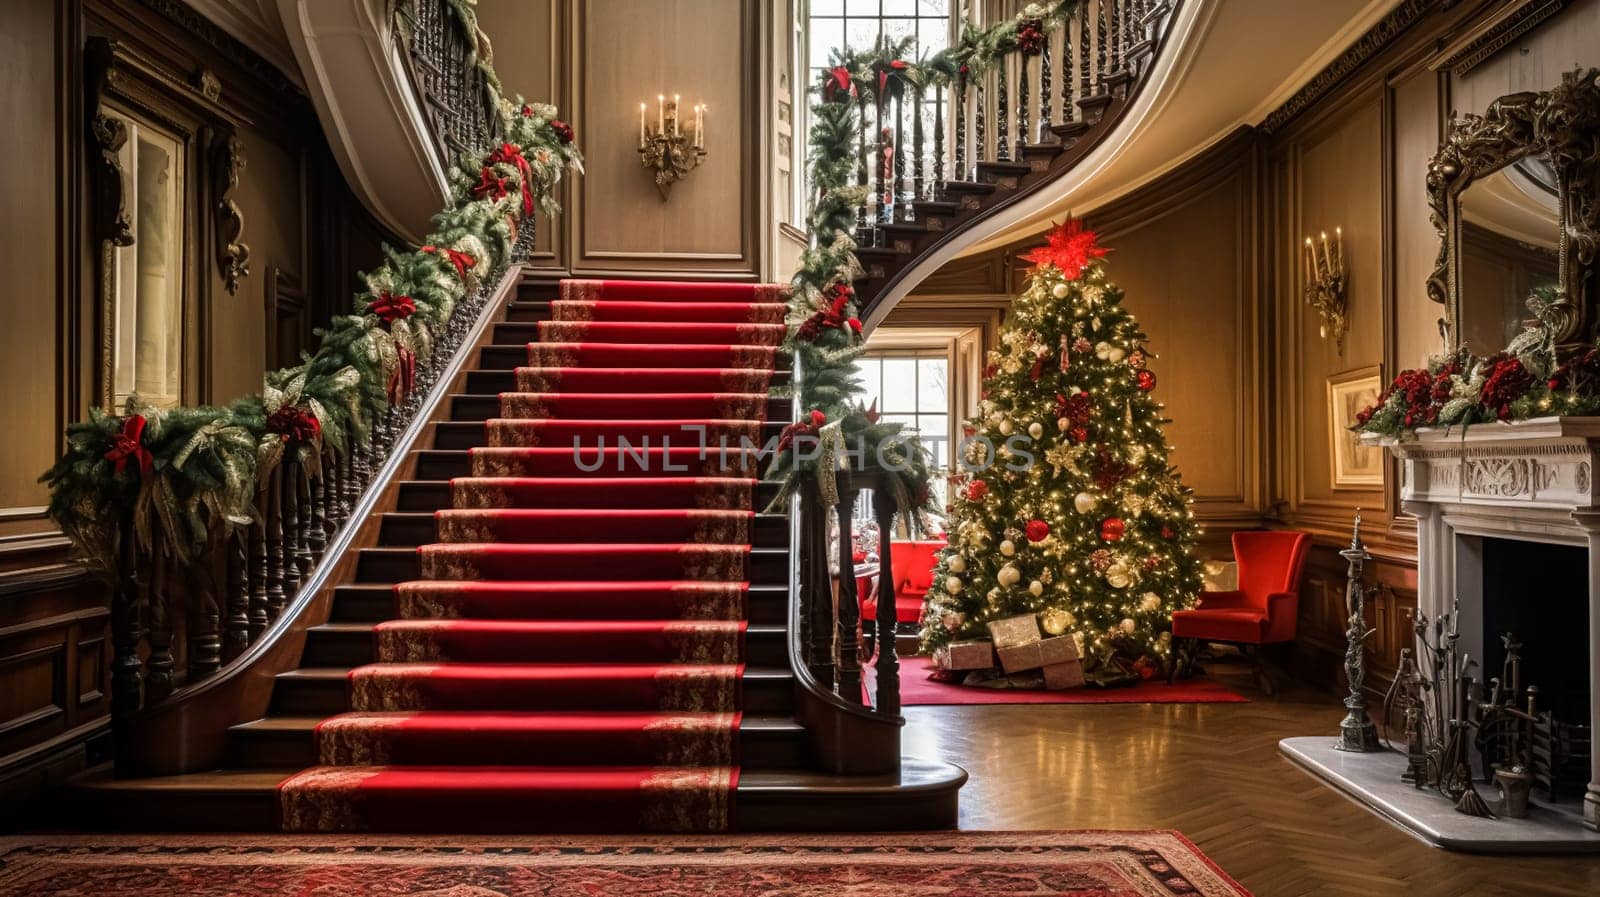 Christmas at the manor, grand entrance hall with staircase and Christmas tree, English countryside decoration and interior decor by Anneleven